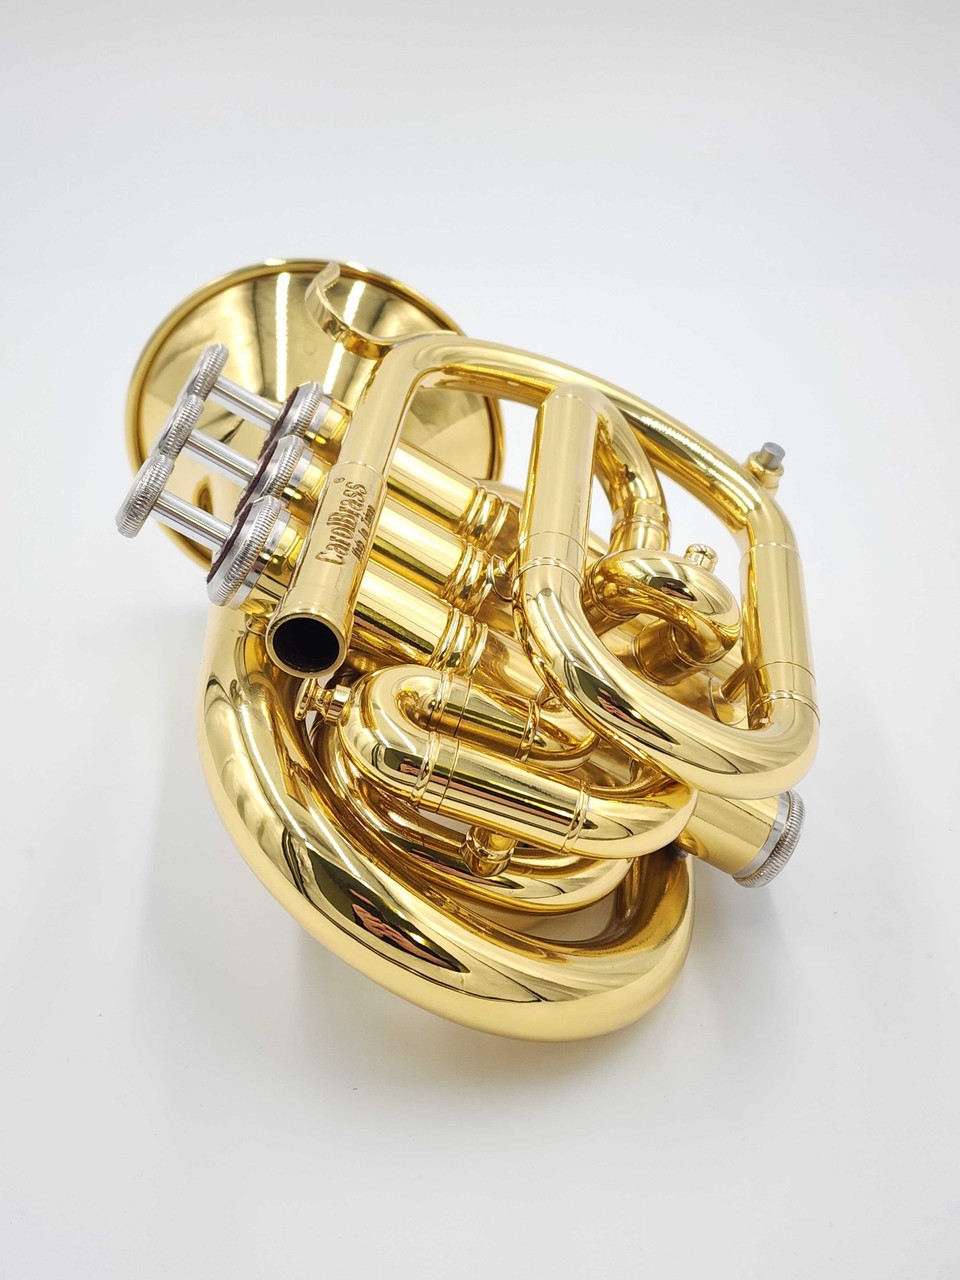 Just in Stock! The Adorable Carolbrass Mini C Pocket Trumpet in Lacquer!